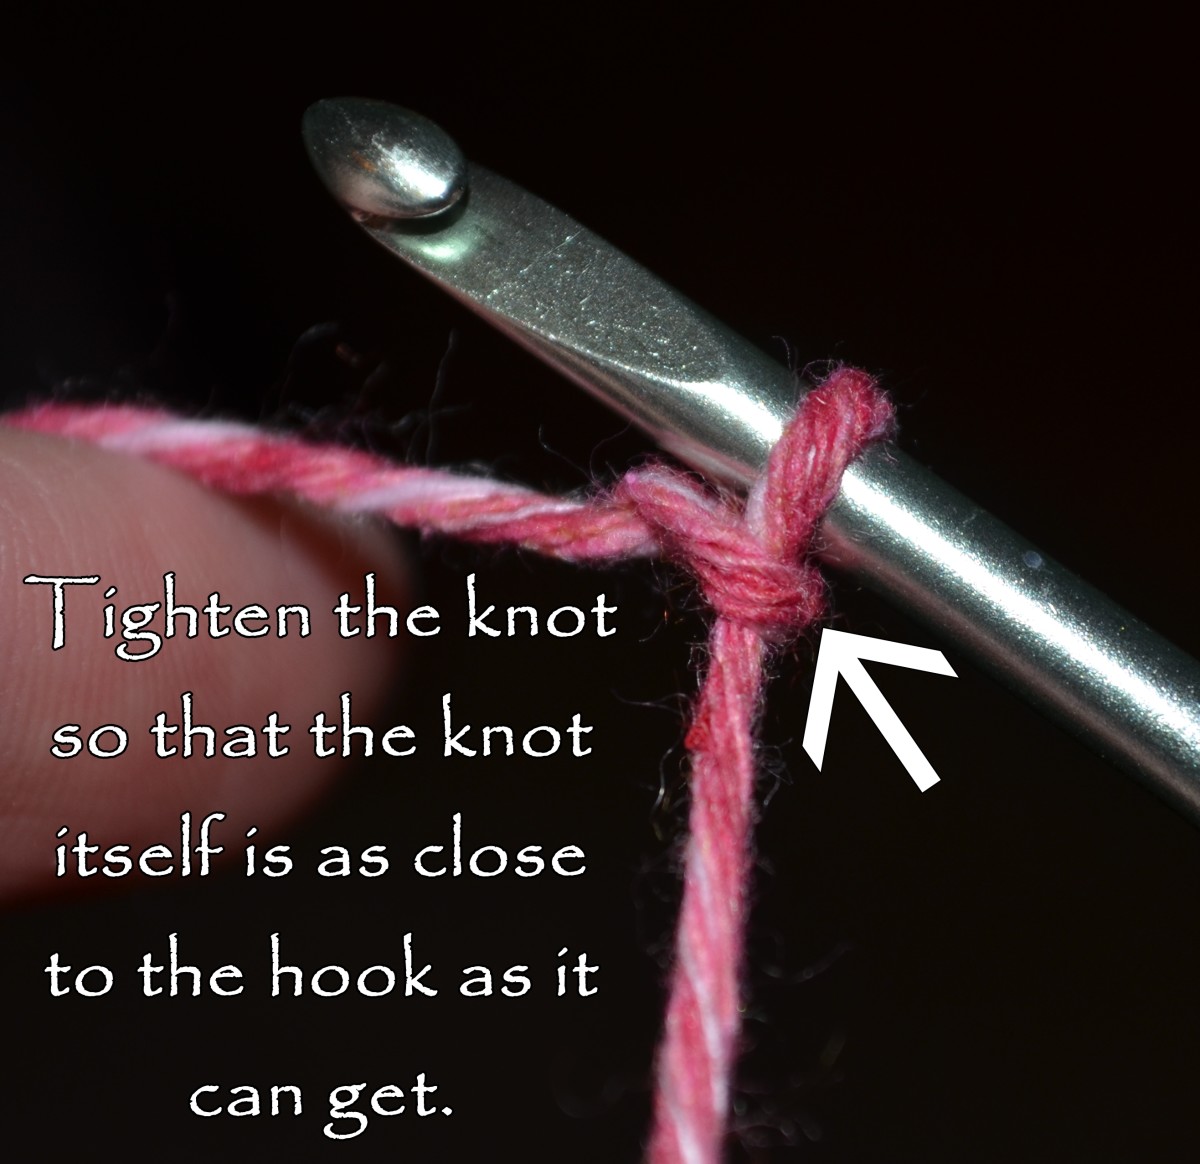 Pull the slip knot tight so that it is as close to the hook as it can get. 